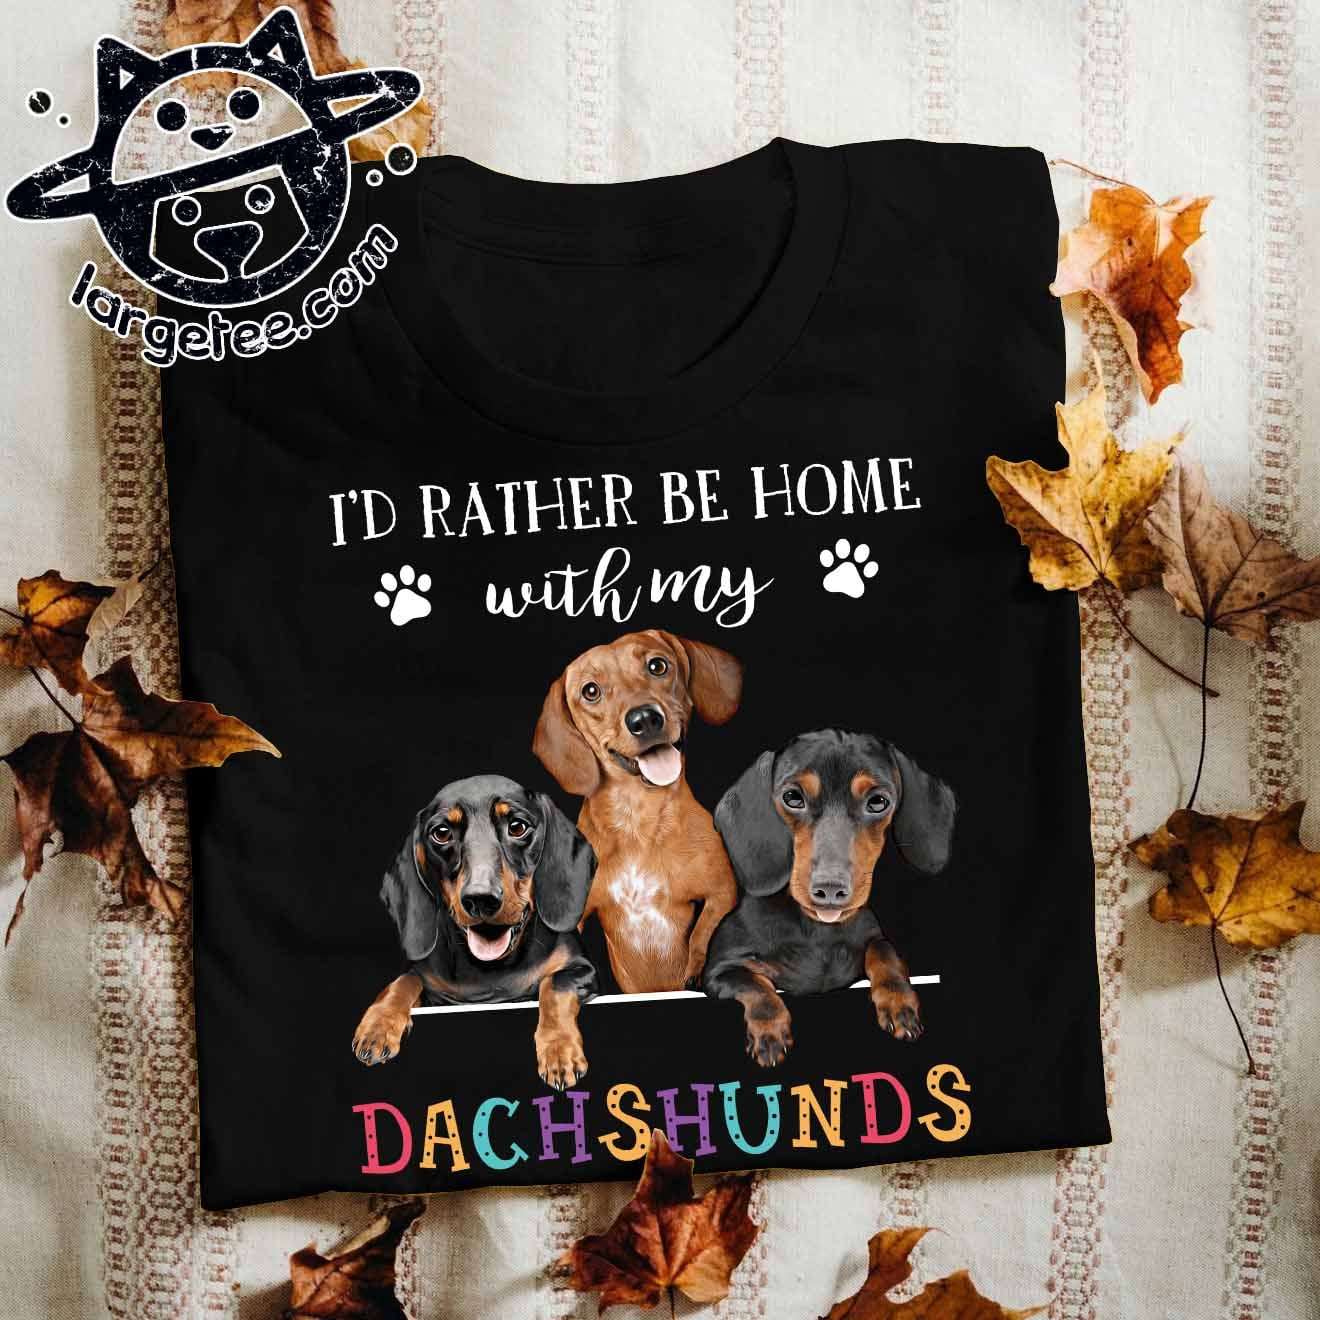 I'd rather be home with my Dachshunds - Dachshunds dog, dog lover